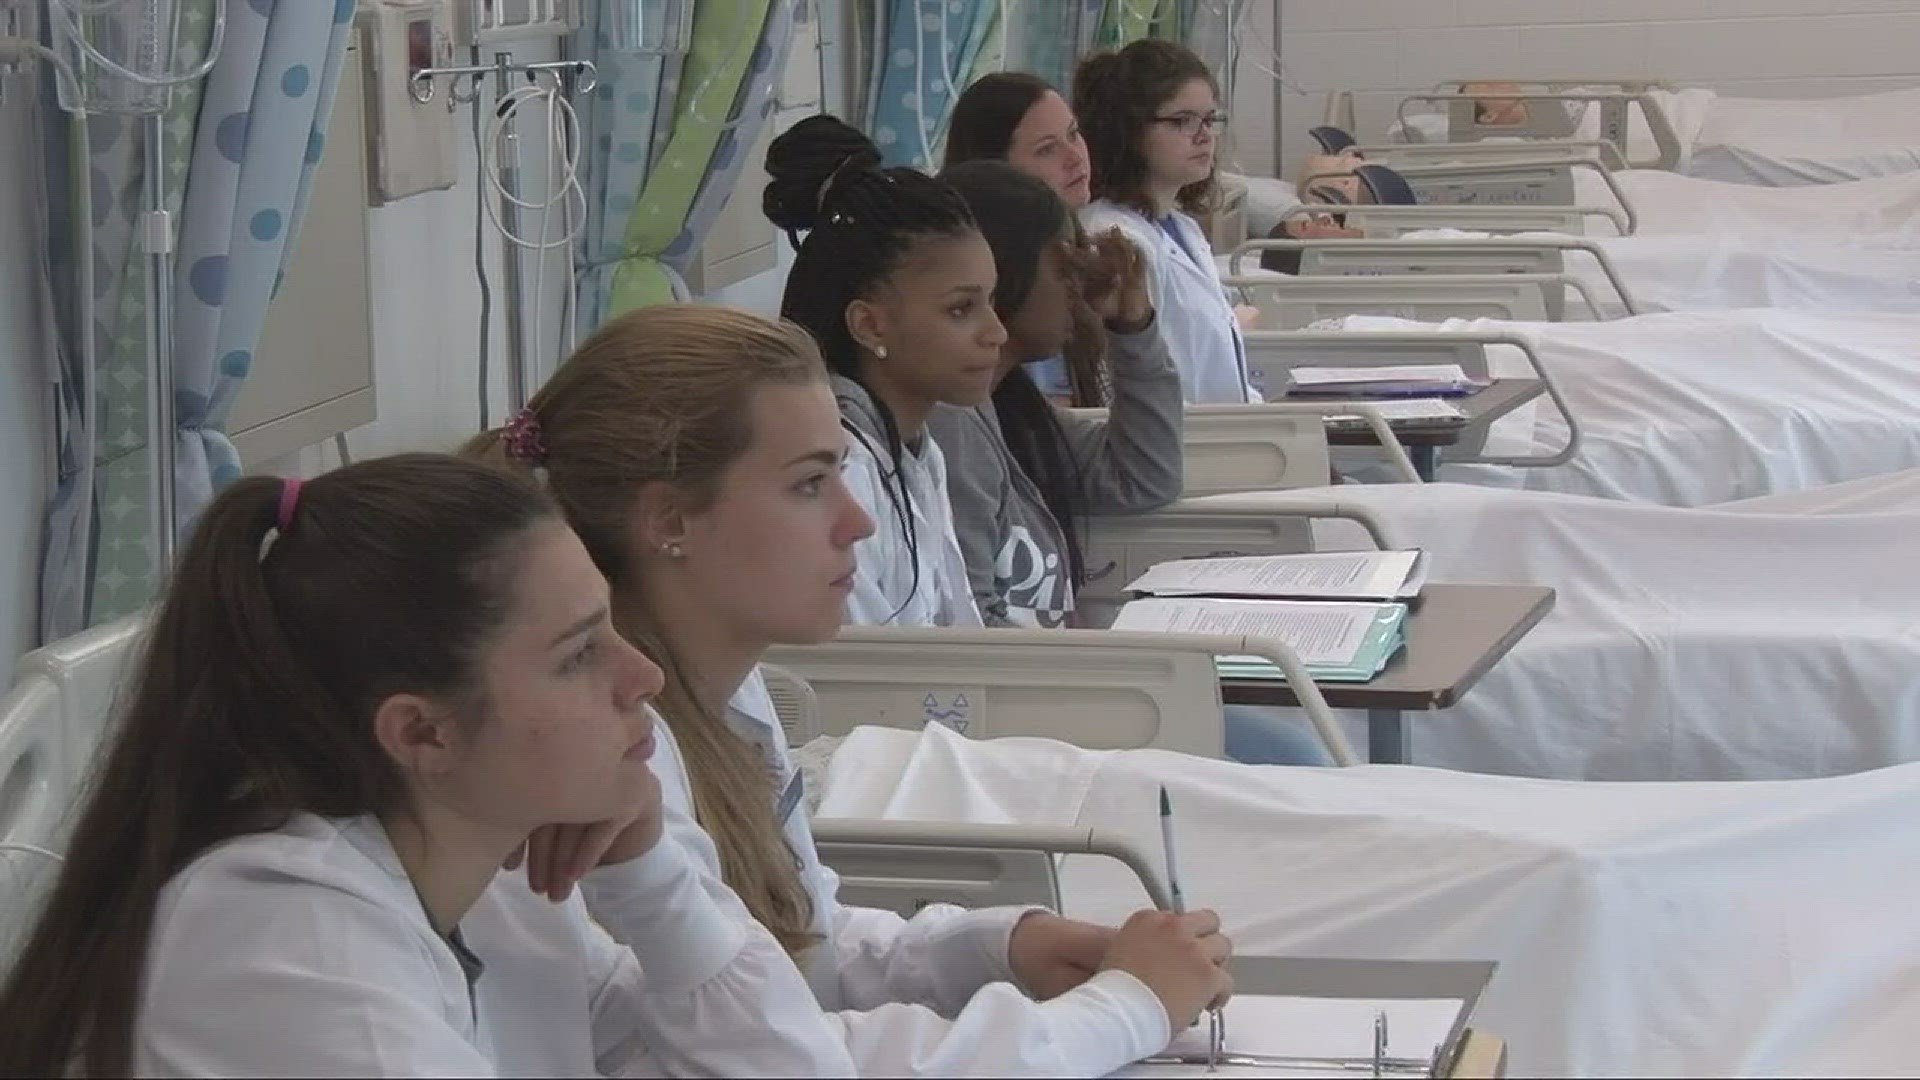 It's no secret that nursing jobs are in high demand in Northeast Ohio and across the country, but getting enough qualified people through school, into the workforce, and quickly, is a challenge.In Northeast Ohio, Ursuline College is trying a new approac